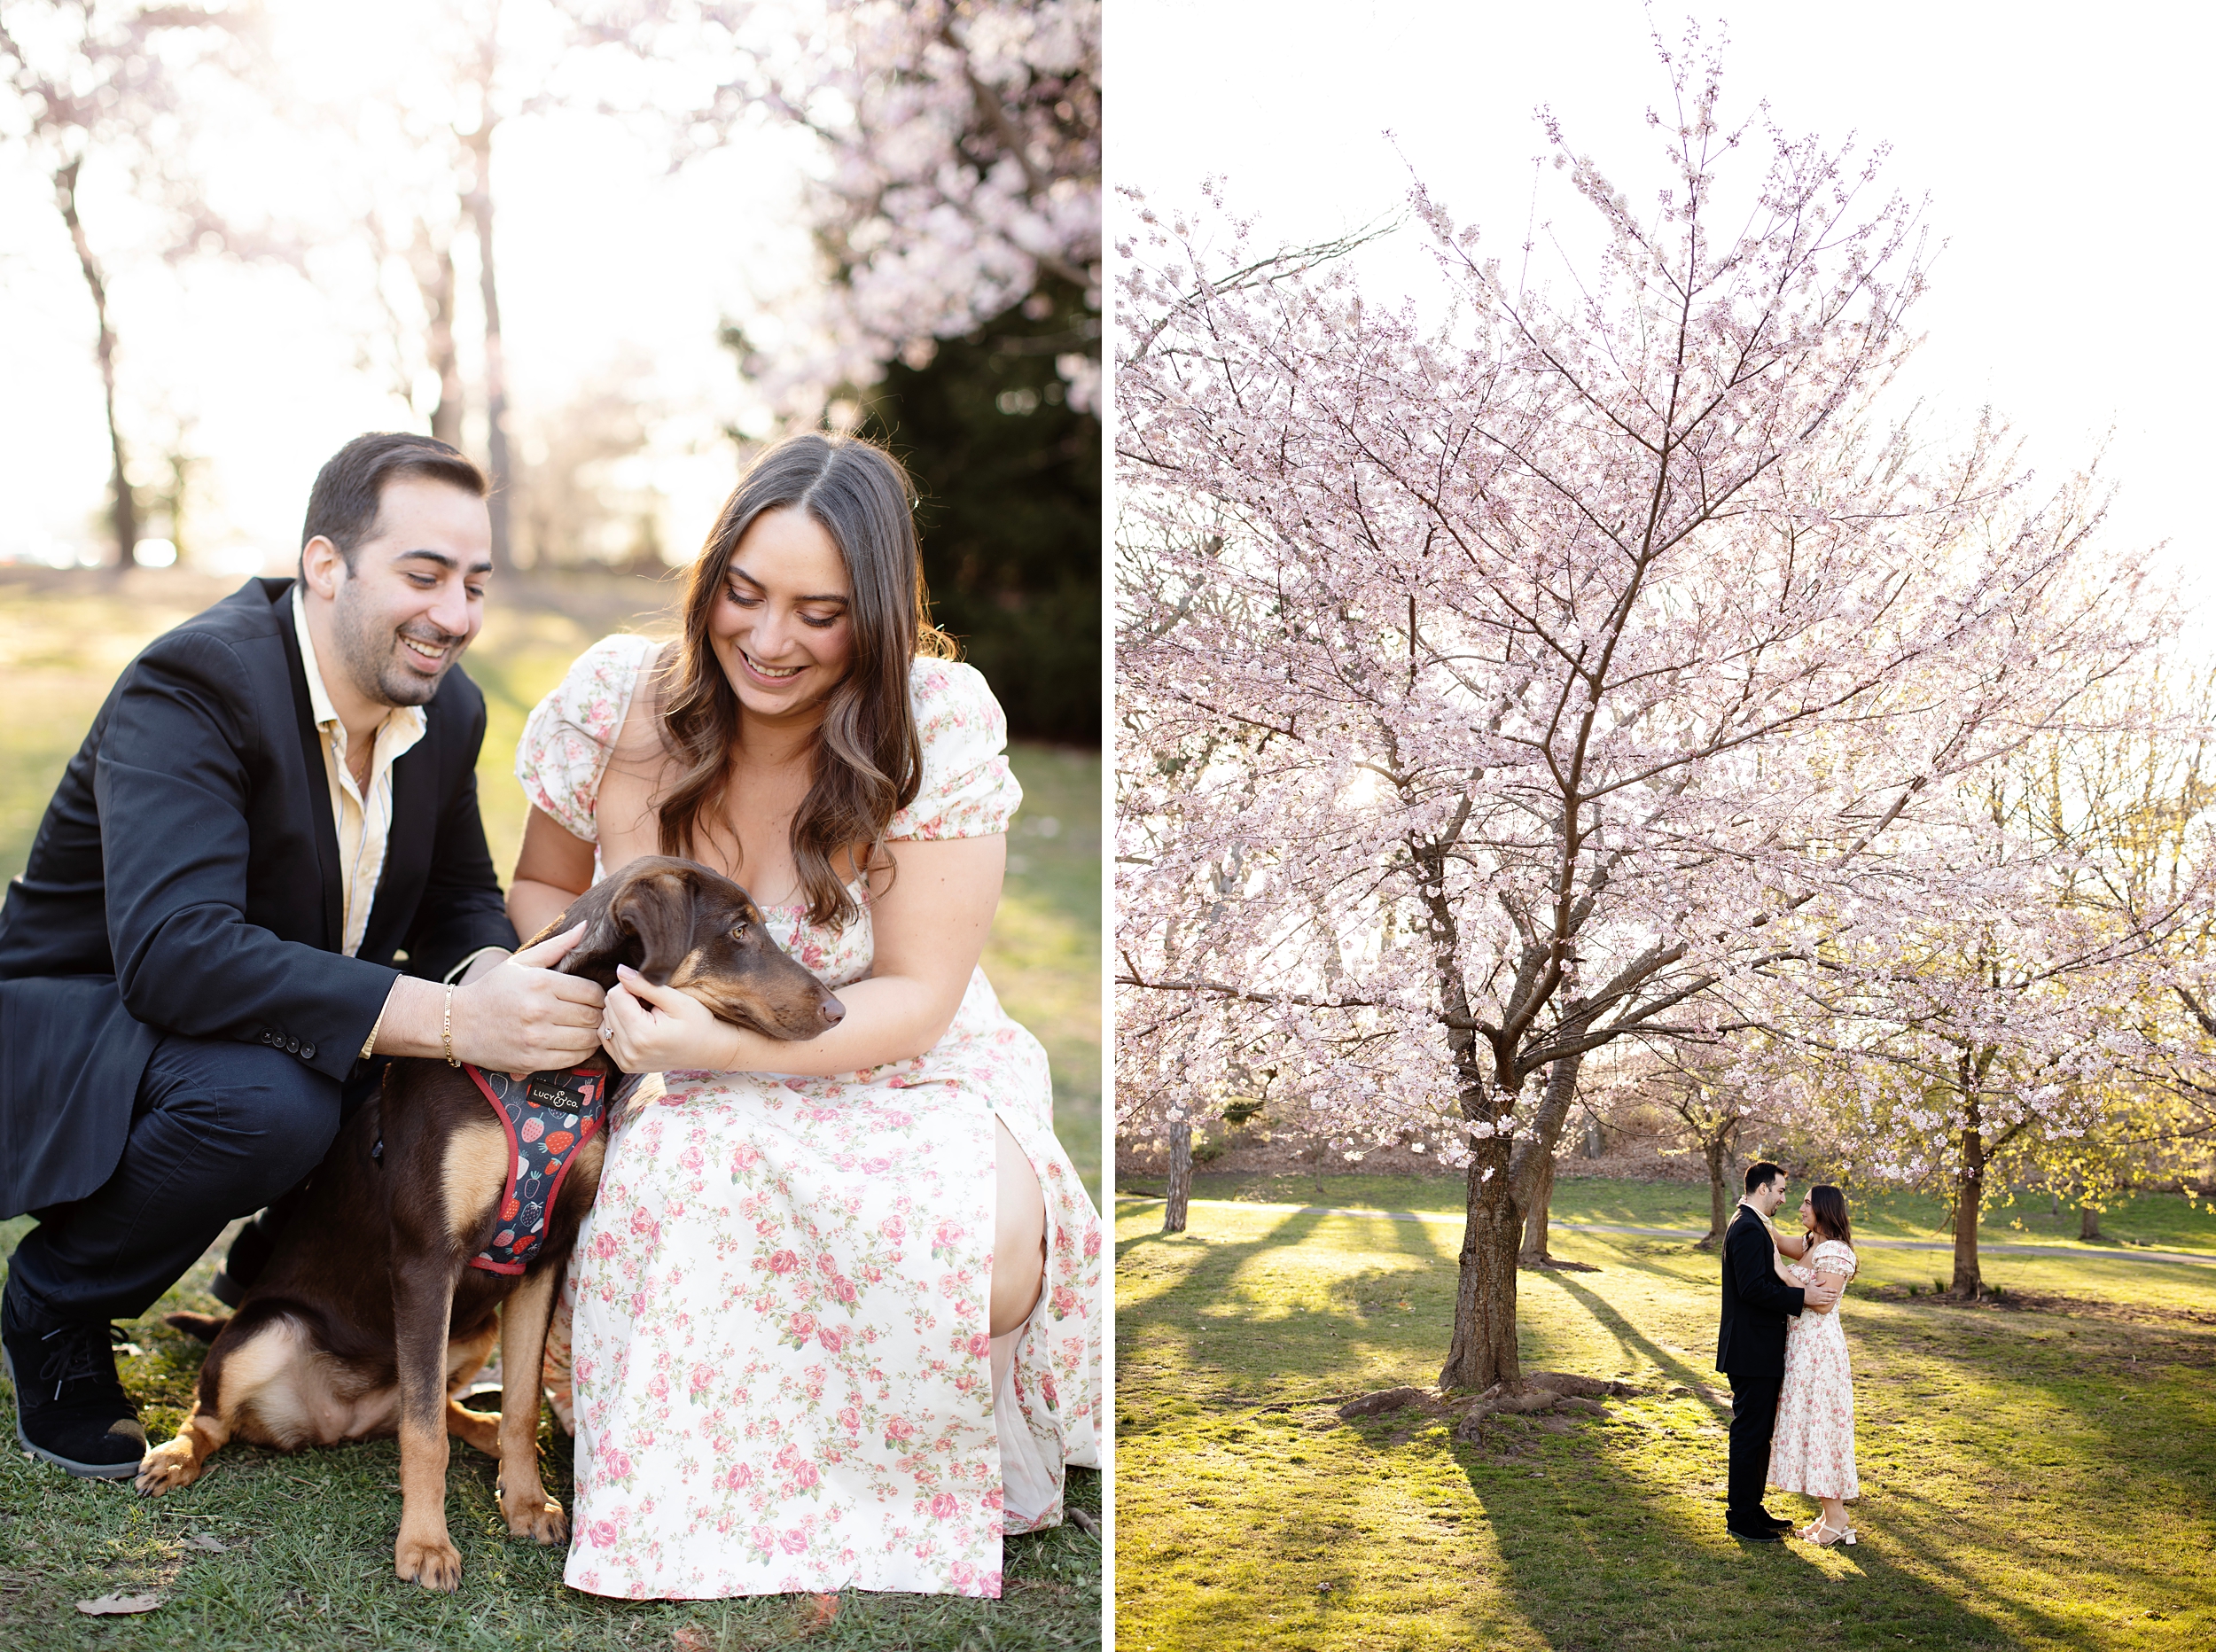 Branch Brook Park NJ Engagement Photos, Cherry Blossom Engagement Photos-New Jersey Wedding and Engagement Photographer